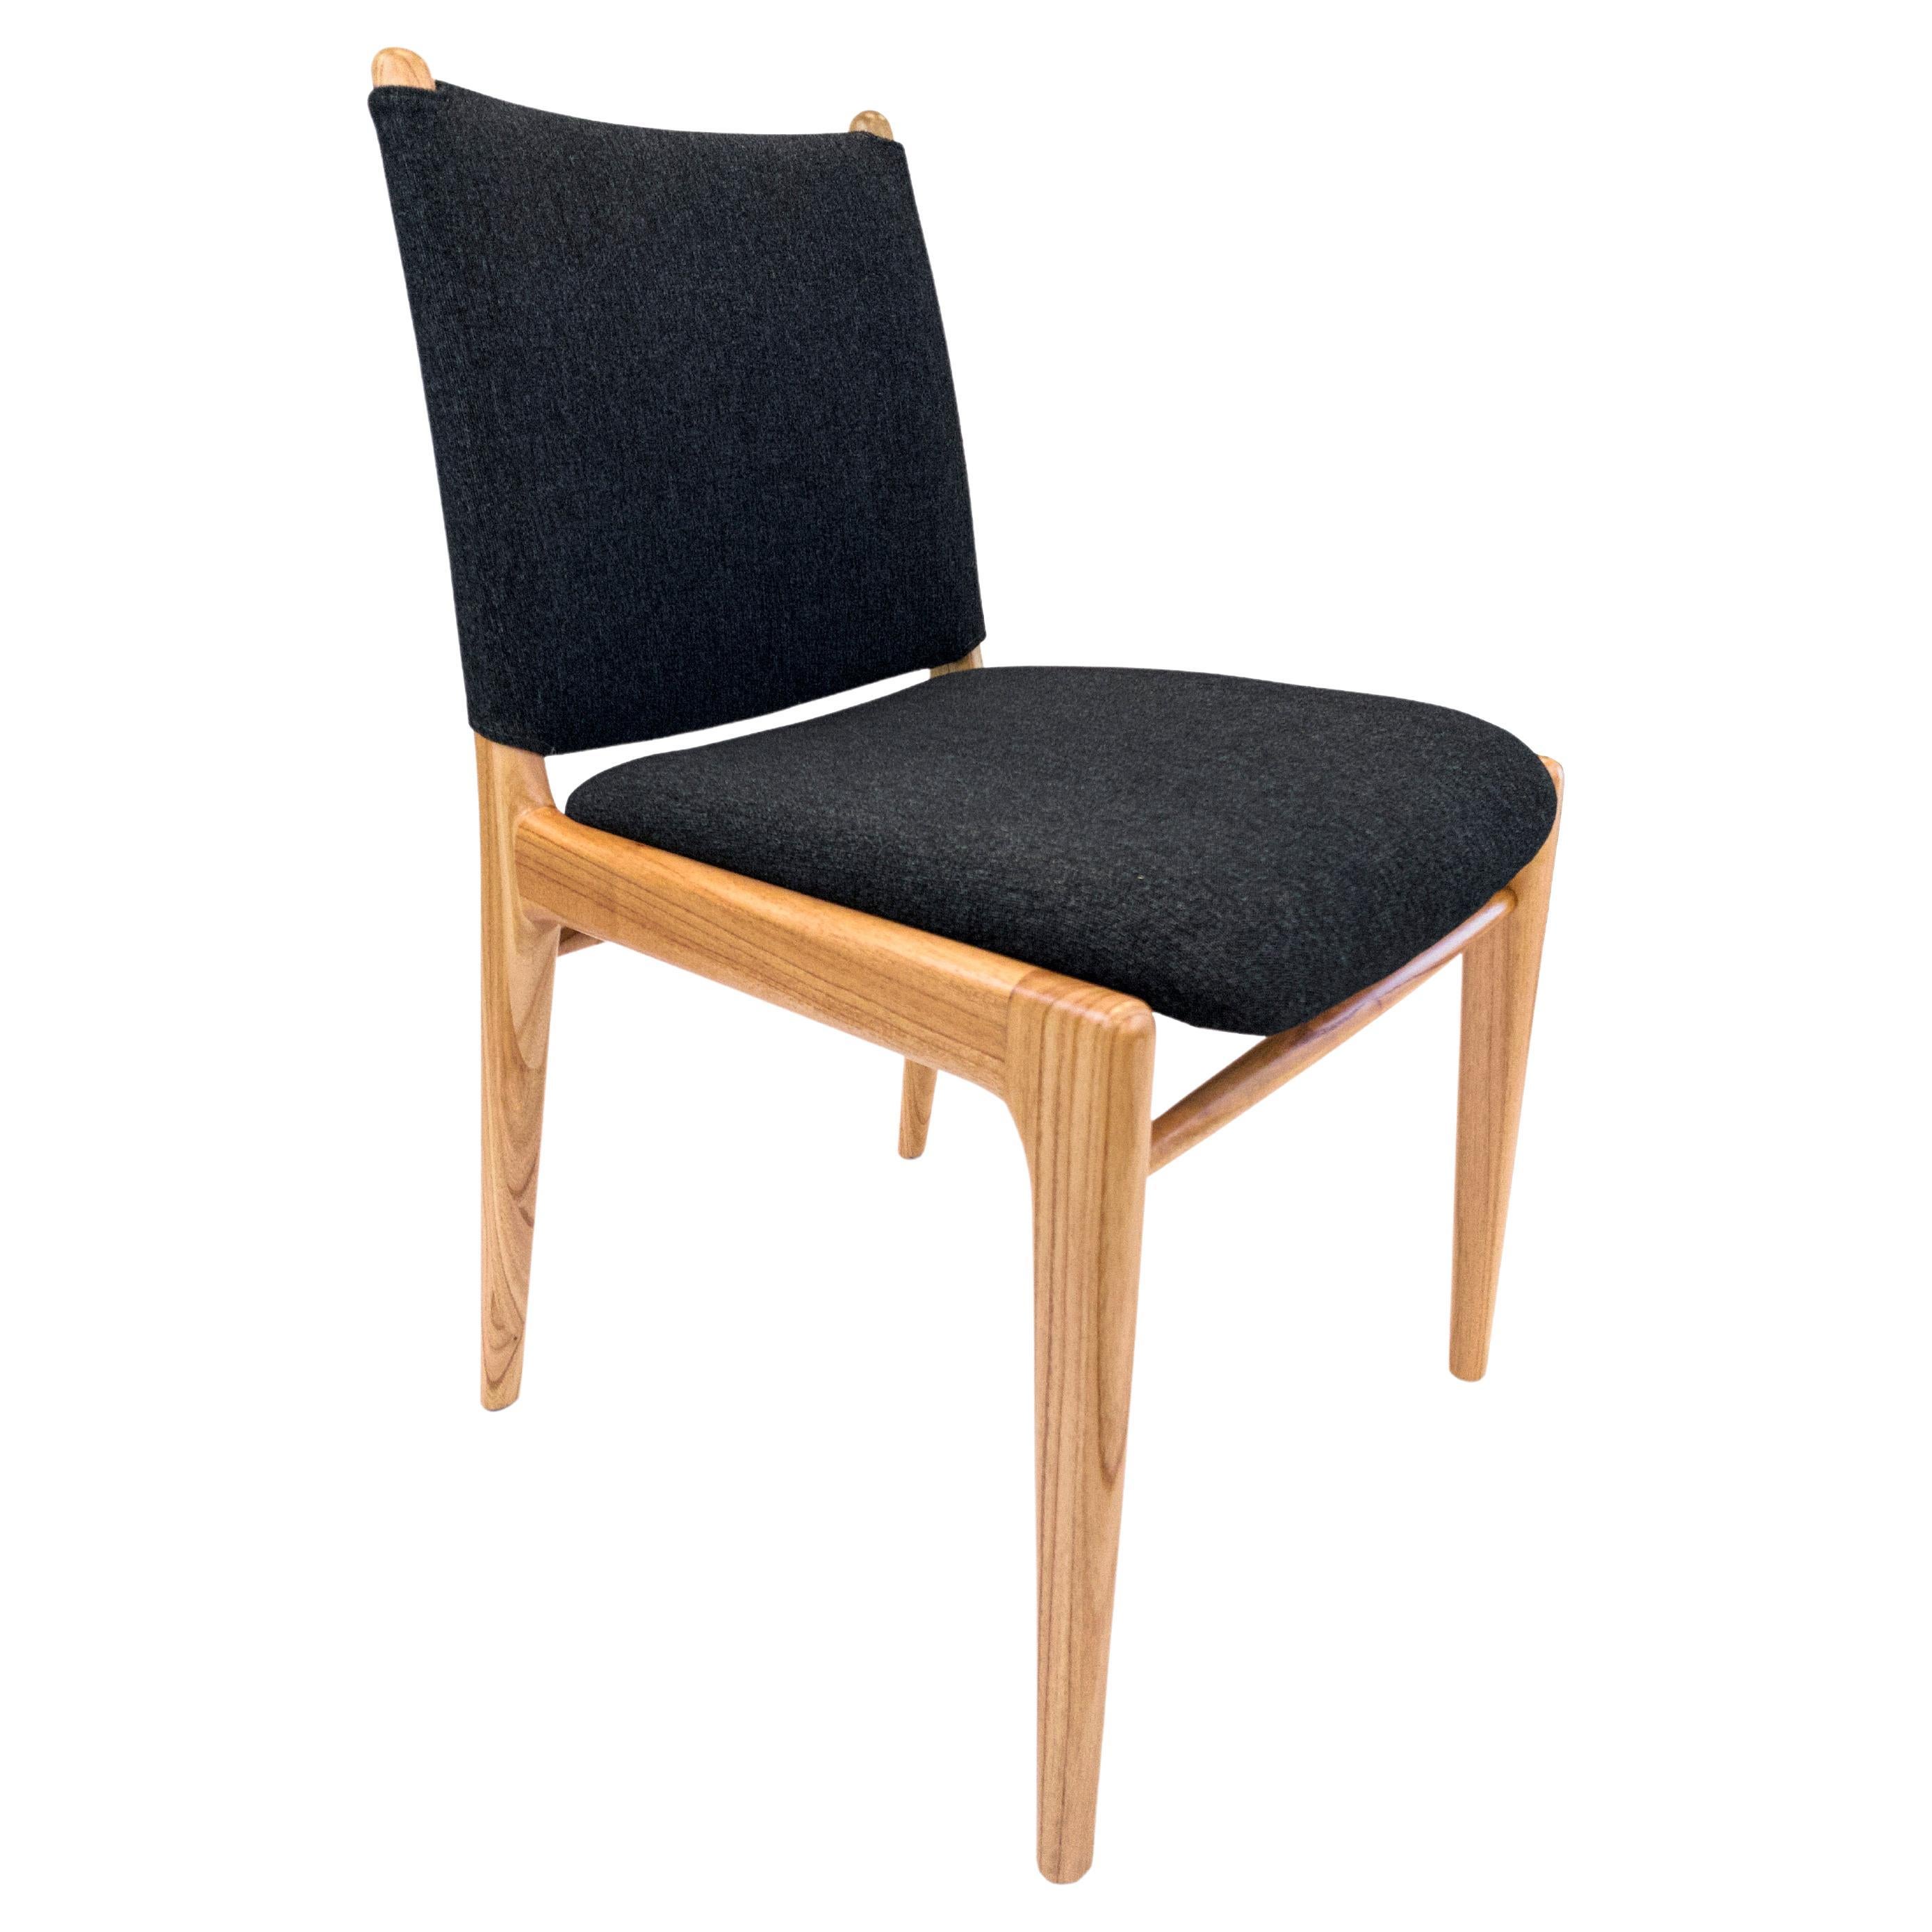 The Cappio chair highlights our beautiful chinaberry wood finish combined with a stunning black fabric, this chair features a unique buckle design on the back of the seat. Our team at Uultis has designed this simple but elegant design that will